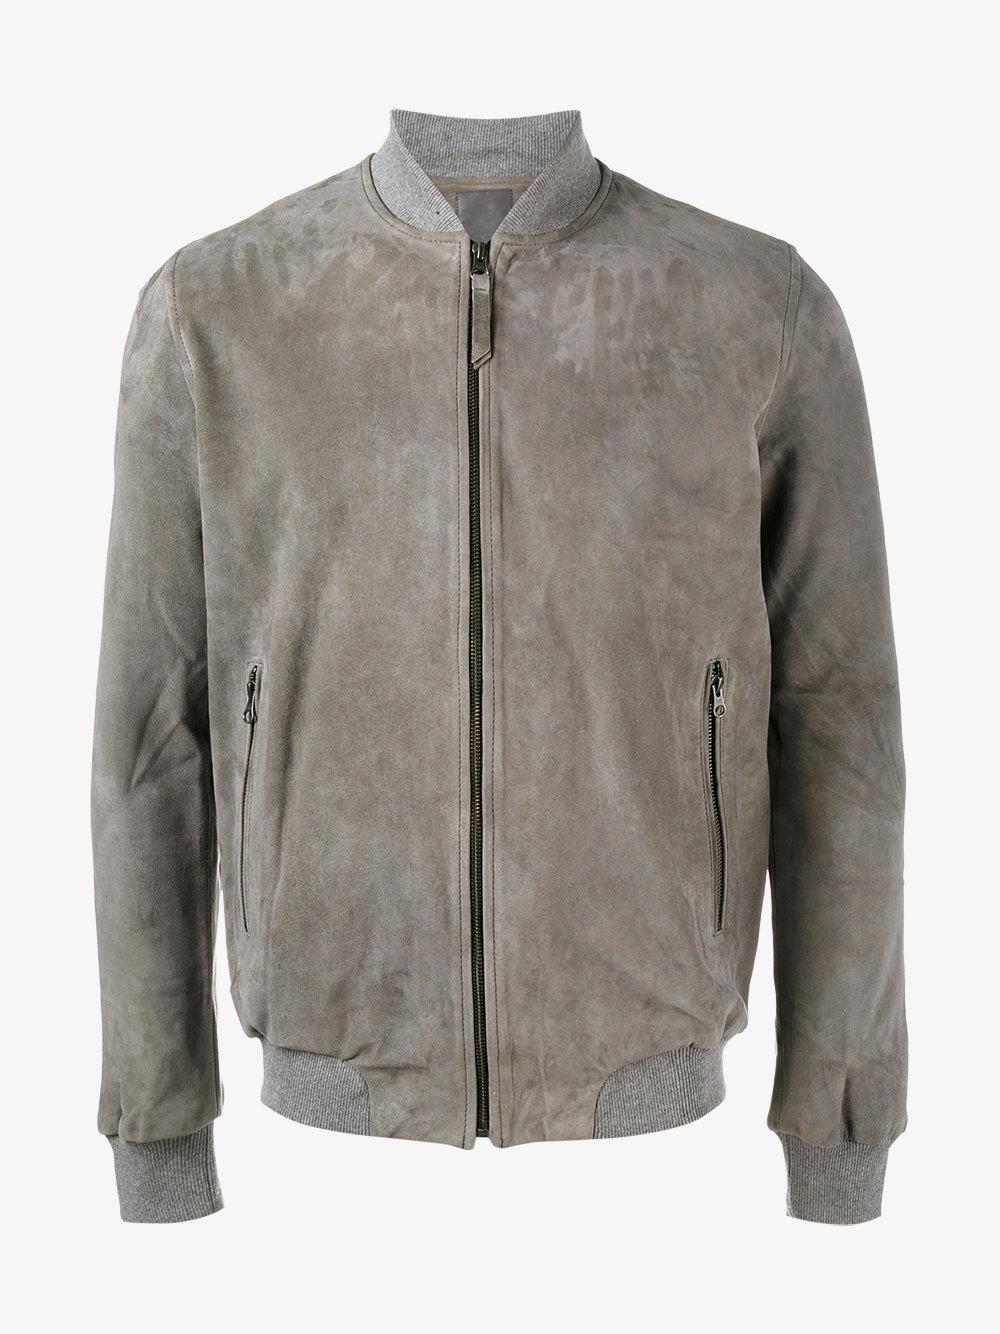 Lyst - Lot78 Classic Bomber Jacket in Gray for Men